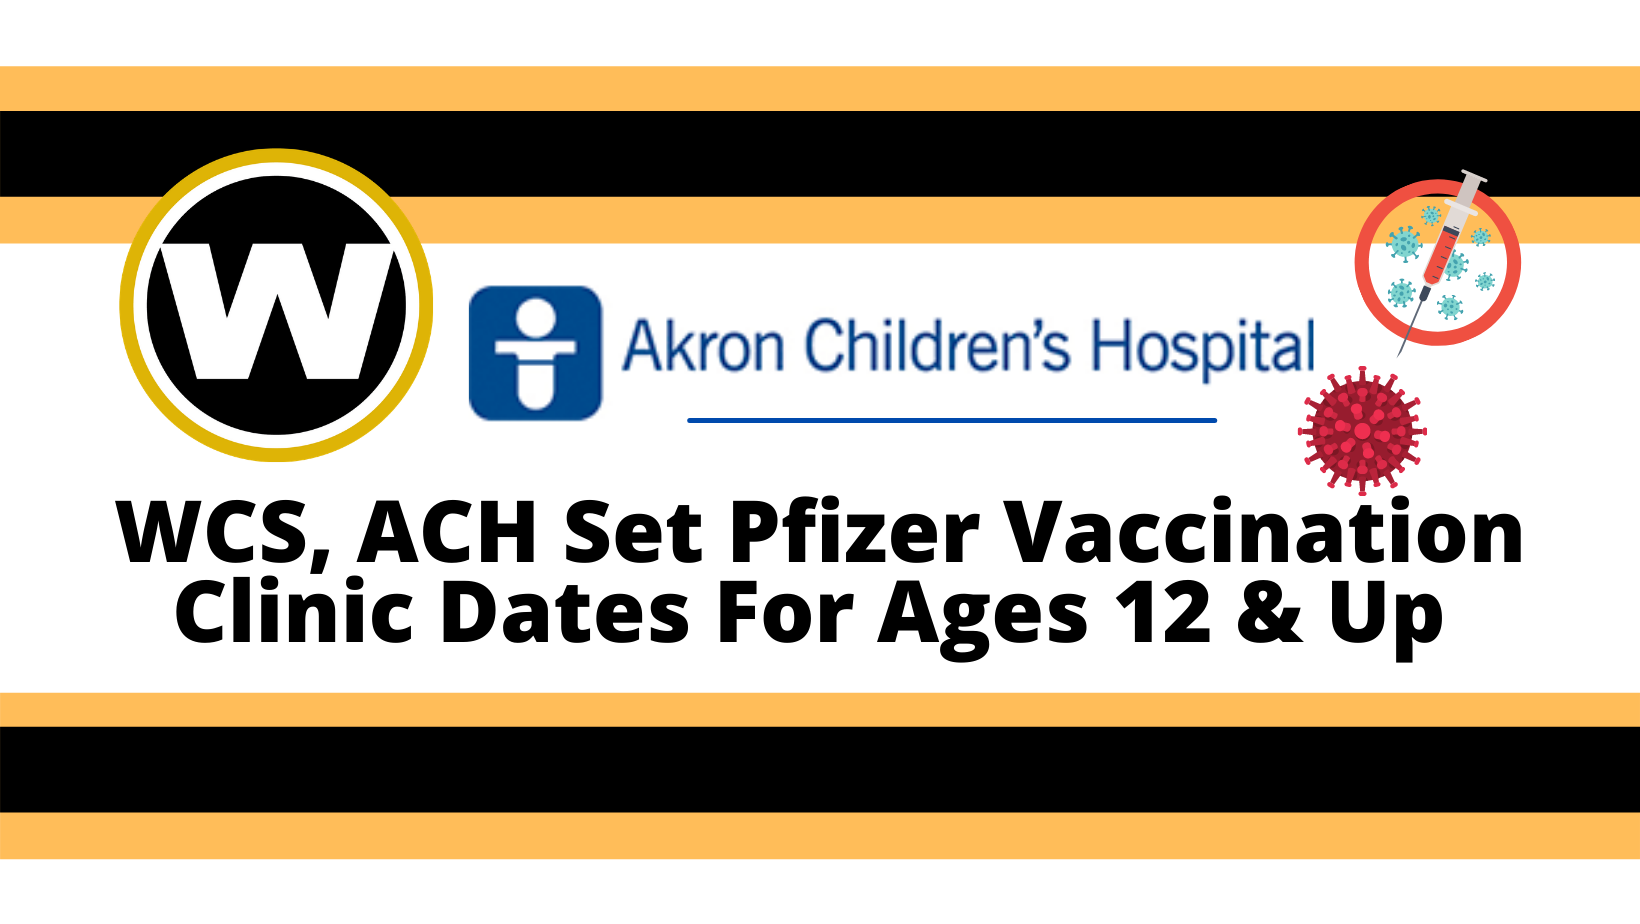 WCS, ACH Facilitating Pfizer Vaccination Clinics for those 12 and older